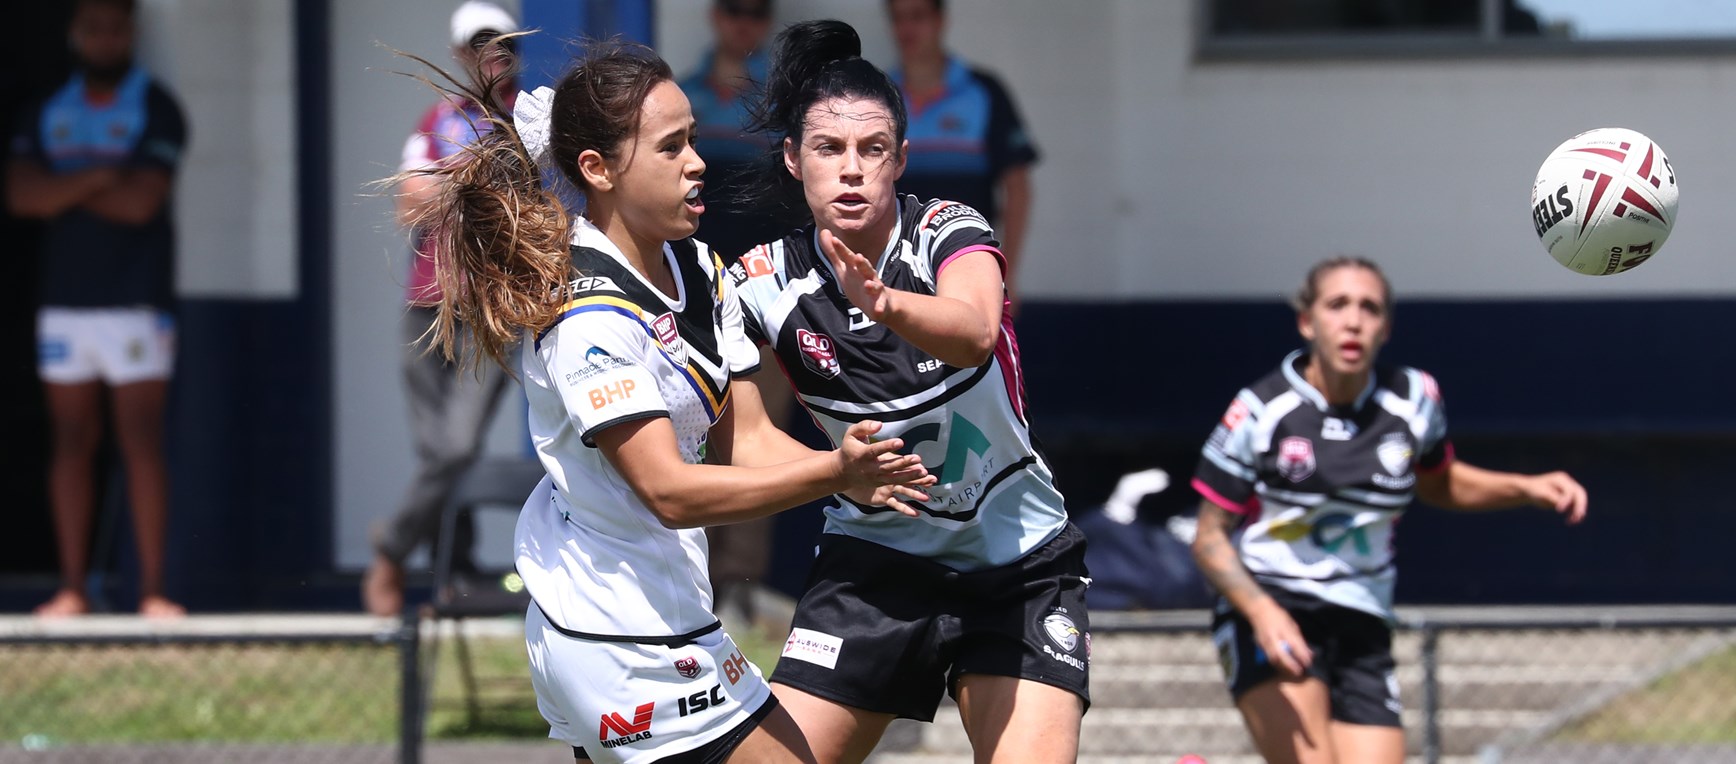 In pictures: BHP Premiership Round 1